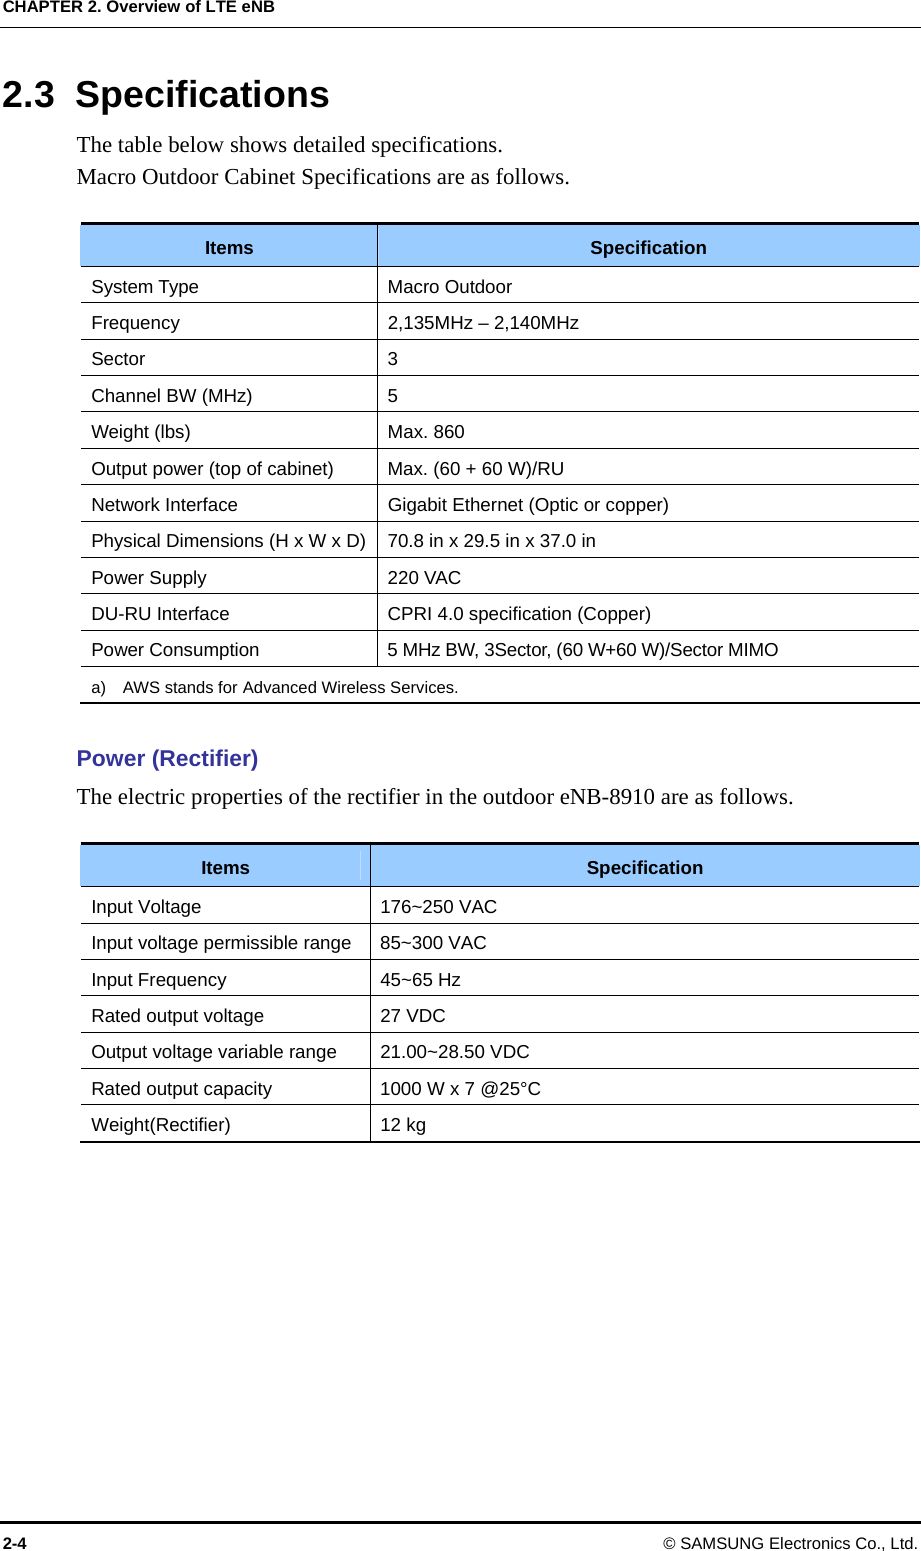 CHAPTER 2. Overview of LTE eNB 2-4  © SAMSUNG Electronics Co., Ltd. 2.3 Specifications The table below shows detailed specifications. Macro Outdoor Cabinet Specifications are as follows.  Items  Specification System Type  Macro Outdoor Frequency  2,135MHz – 2,140MHz Sector 3 Channel BW (MHz)  5 Weight (lbs)  Max. 860 Output power (top of cabinet)  Max. (60 + 60 W)/RU Network Interface  Gigabit Ethernet (Optic or copper) Physical Dimensions (H x W x D)  70.8 in x 29.5 in x 37.0 in Power Supply  220 VAC DU-RU Interface  CPRI 4.0 specification (Copper) Power Consumption  5 MHz BW, 3Sector, (60 W+60 W)/Sector MIMO a)  AWS stands for Advanced Wireless Services.    Power (Rectifier) The electric properties of the rectifier in the outdoor eNB-8910 are as follows.  Items  Specification Input Voltage    176~250 VAC Input voltage permissible range  85~300 VAC Input Frequency  45~65 Hz Rated output voltage  27 VDC Output voltage variable range  21.00~28.50 VDC Rated output capacity  1000 W x 7 @25°C Weight(Rectifier) 12 kg   